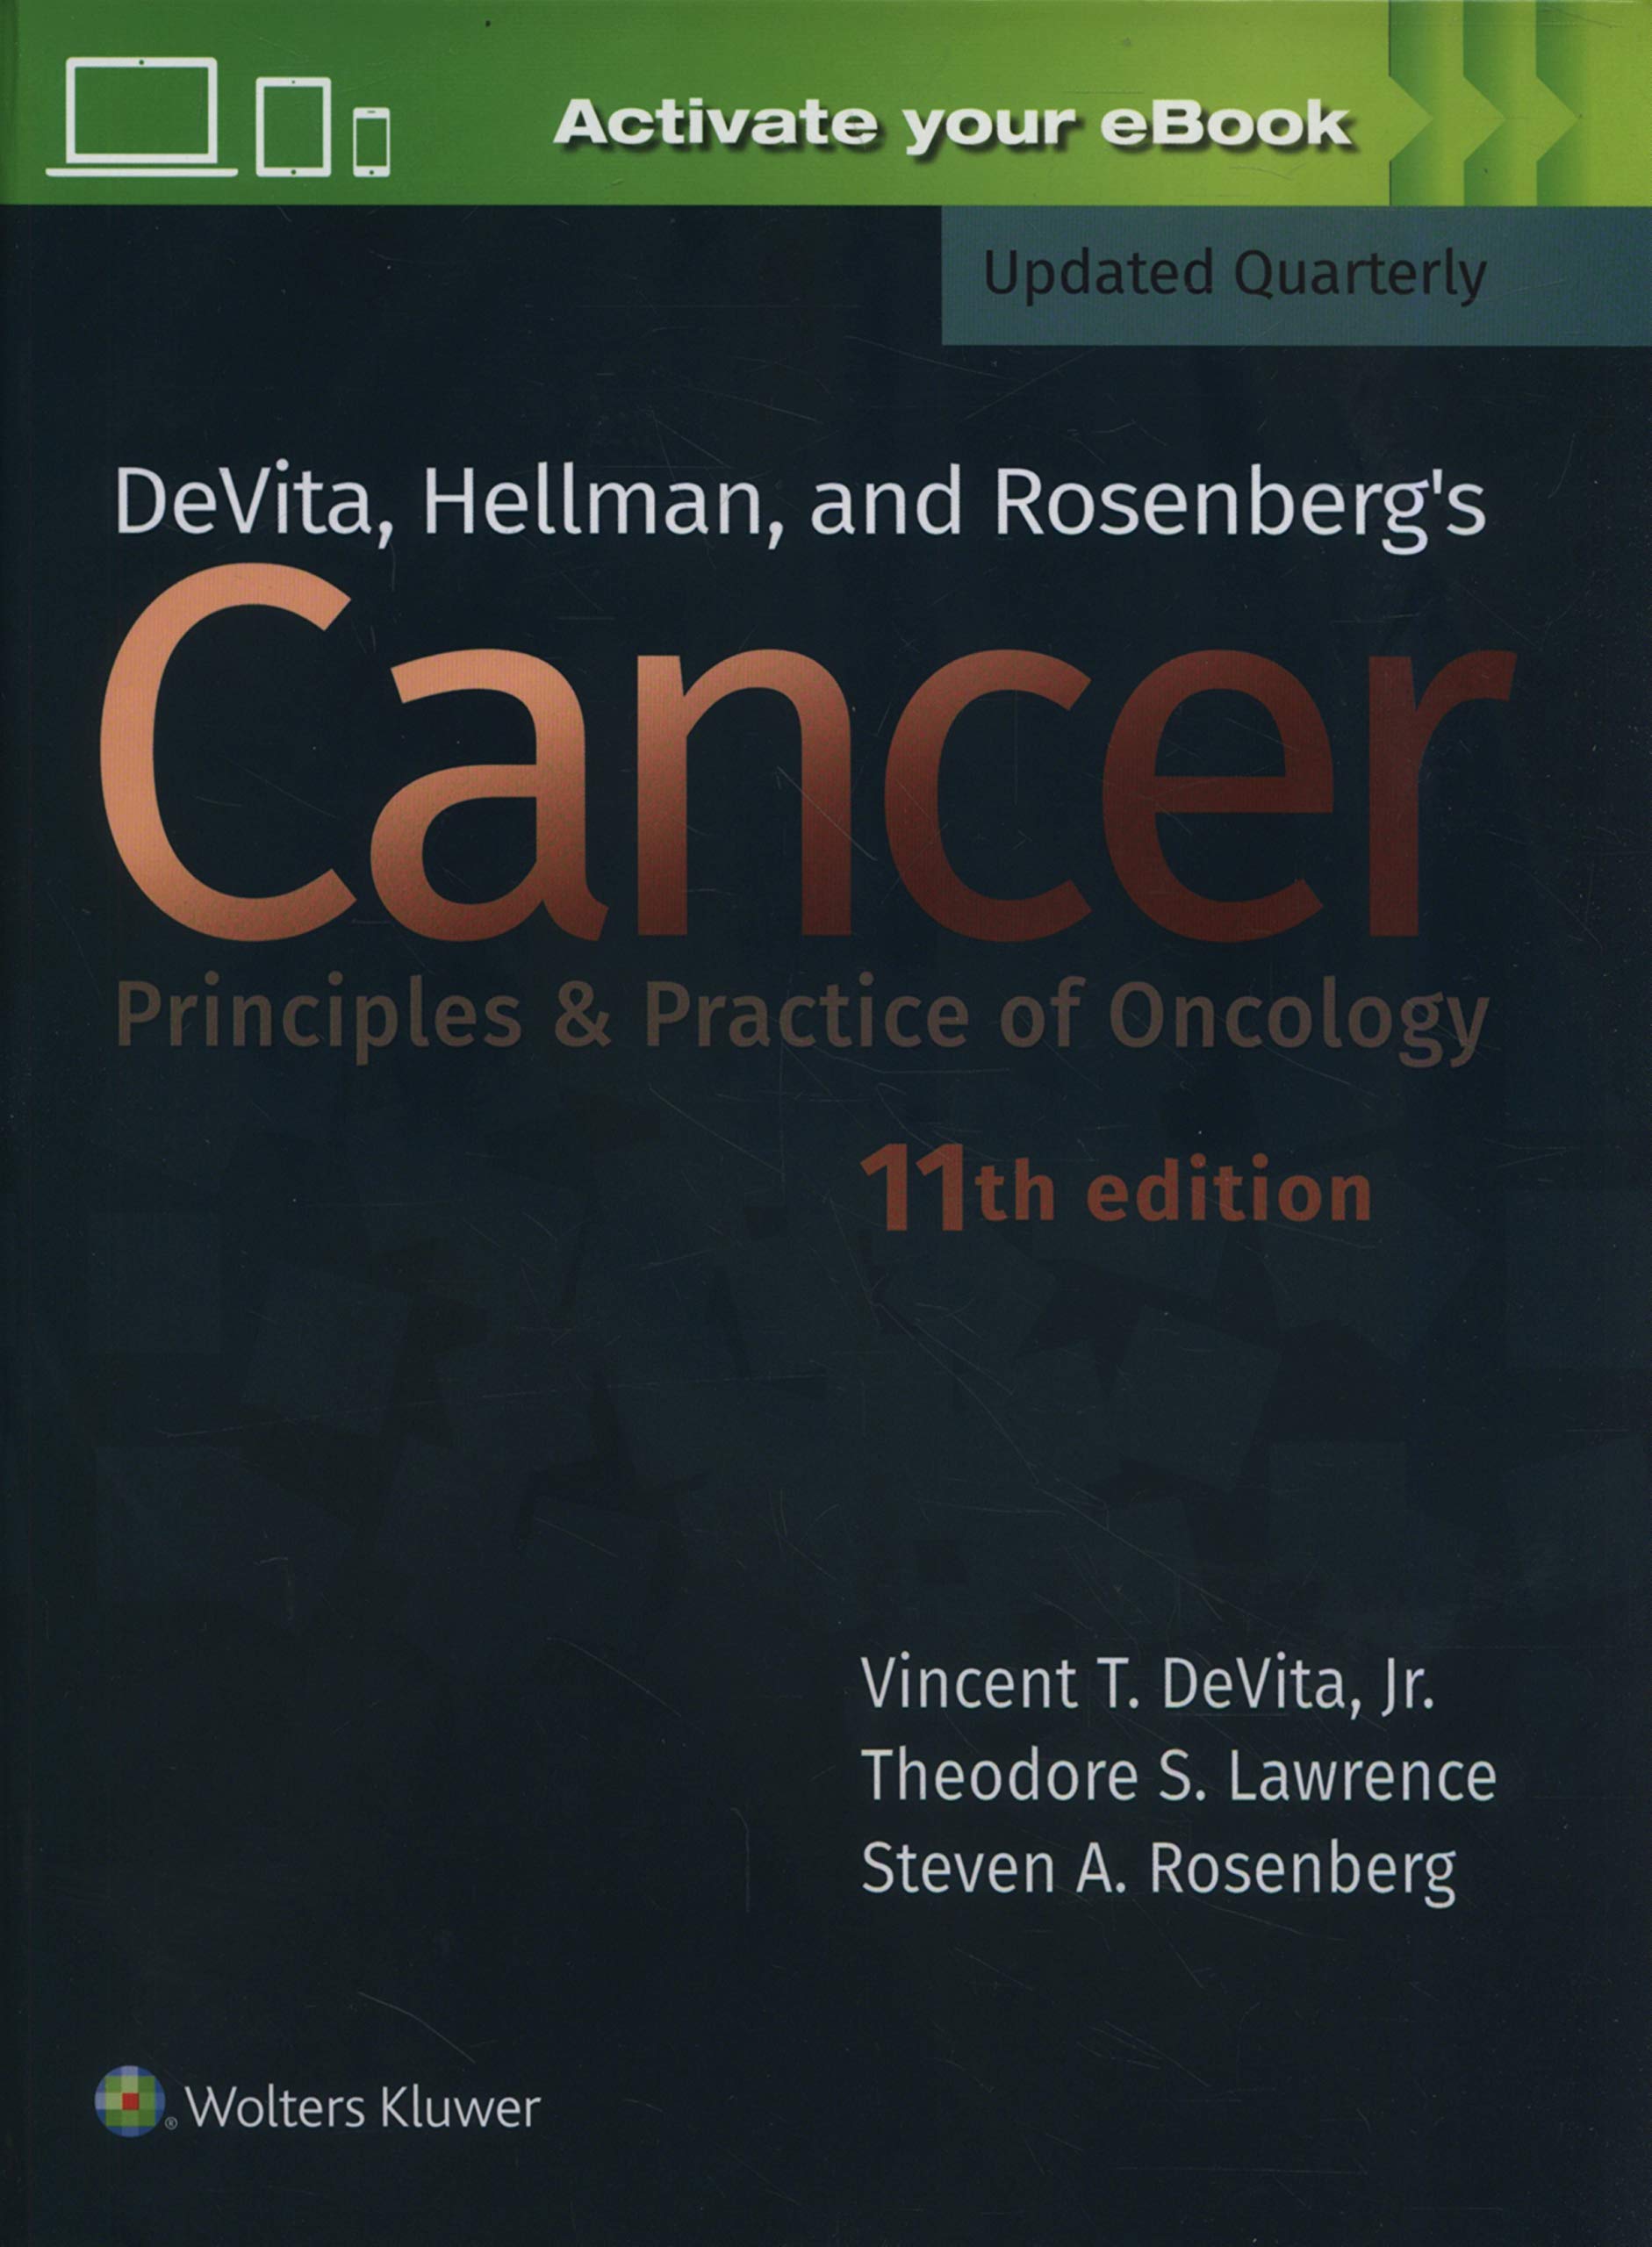 devita-hellman-and-rosenbergs-cancer-principles-practice-of-oncology